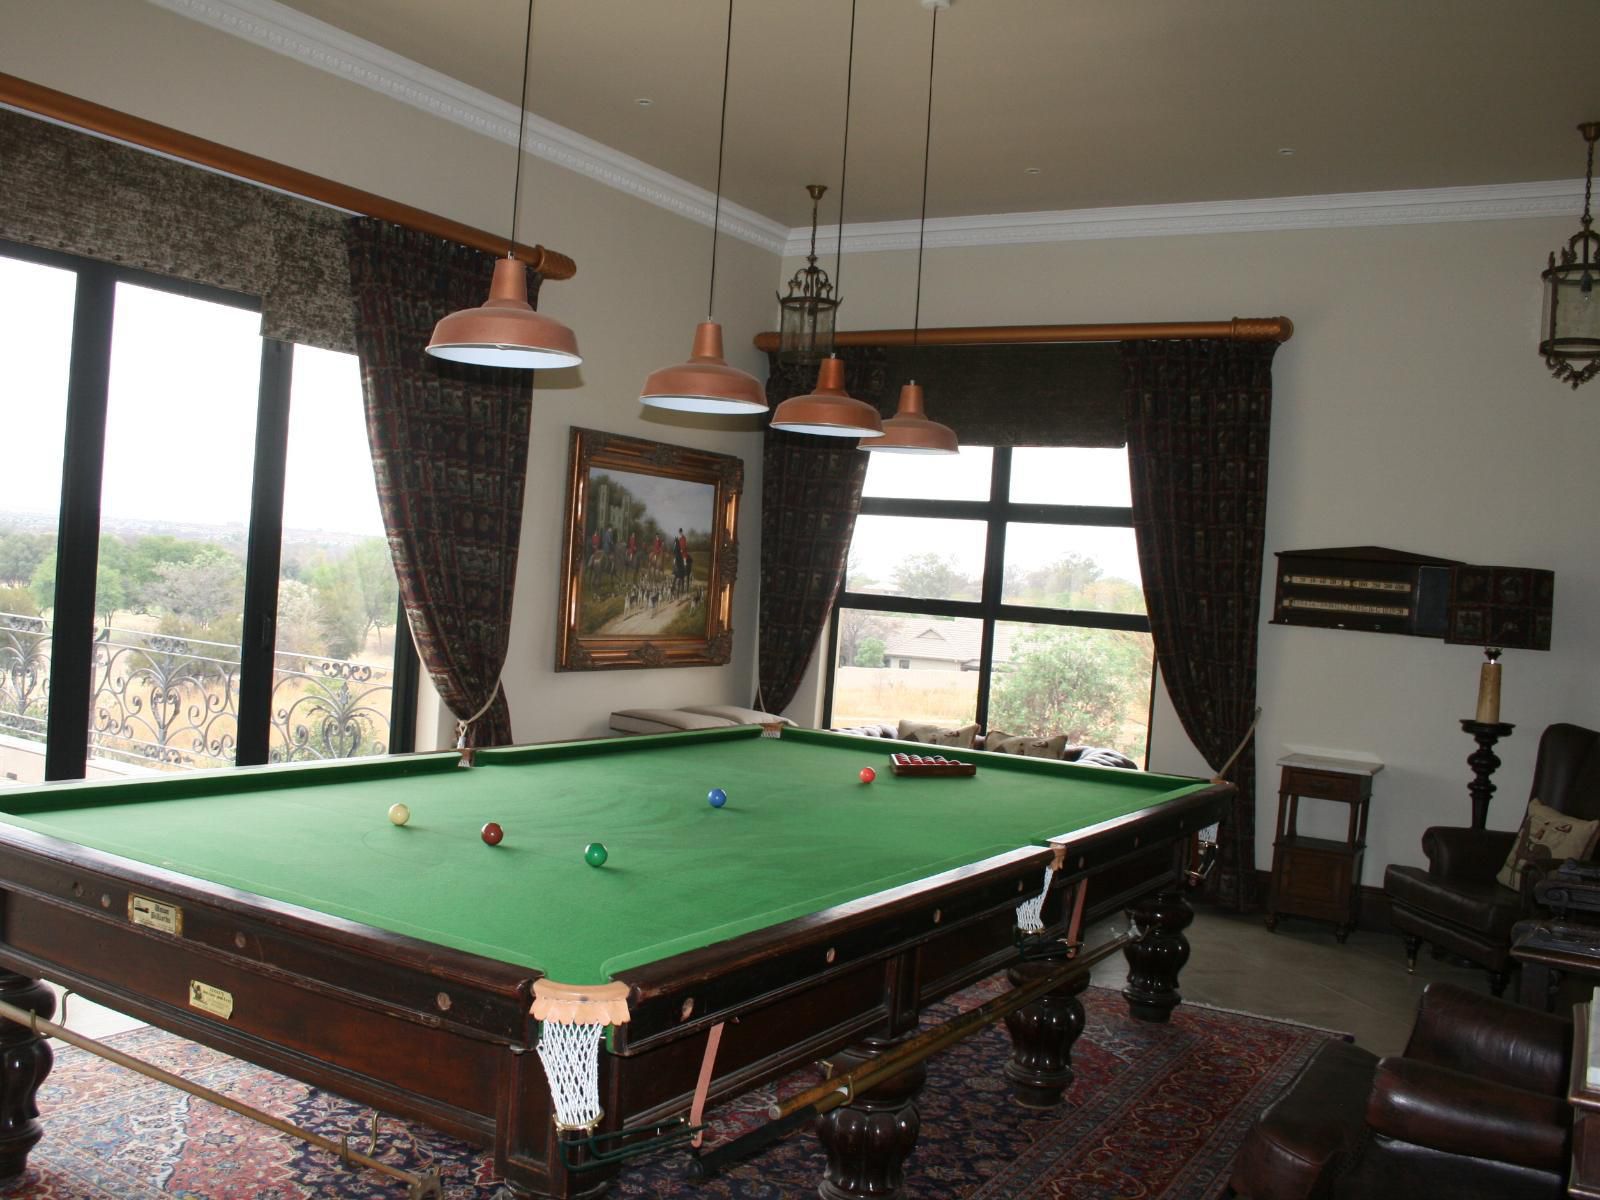 The Duke S Manor Modimolle Nylstroom Limpopo Province South Africa Billiards, Sport, Living Room